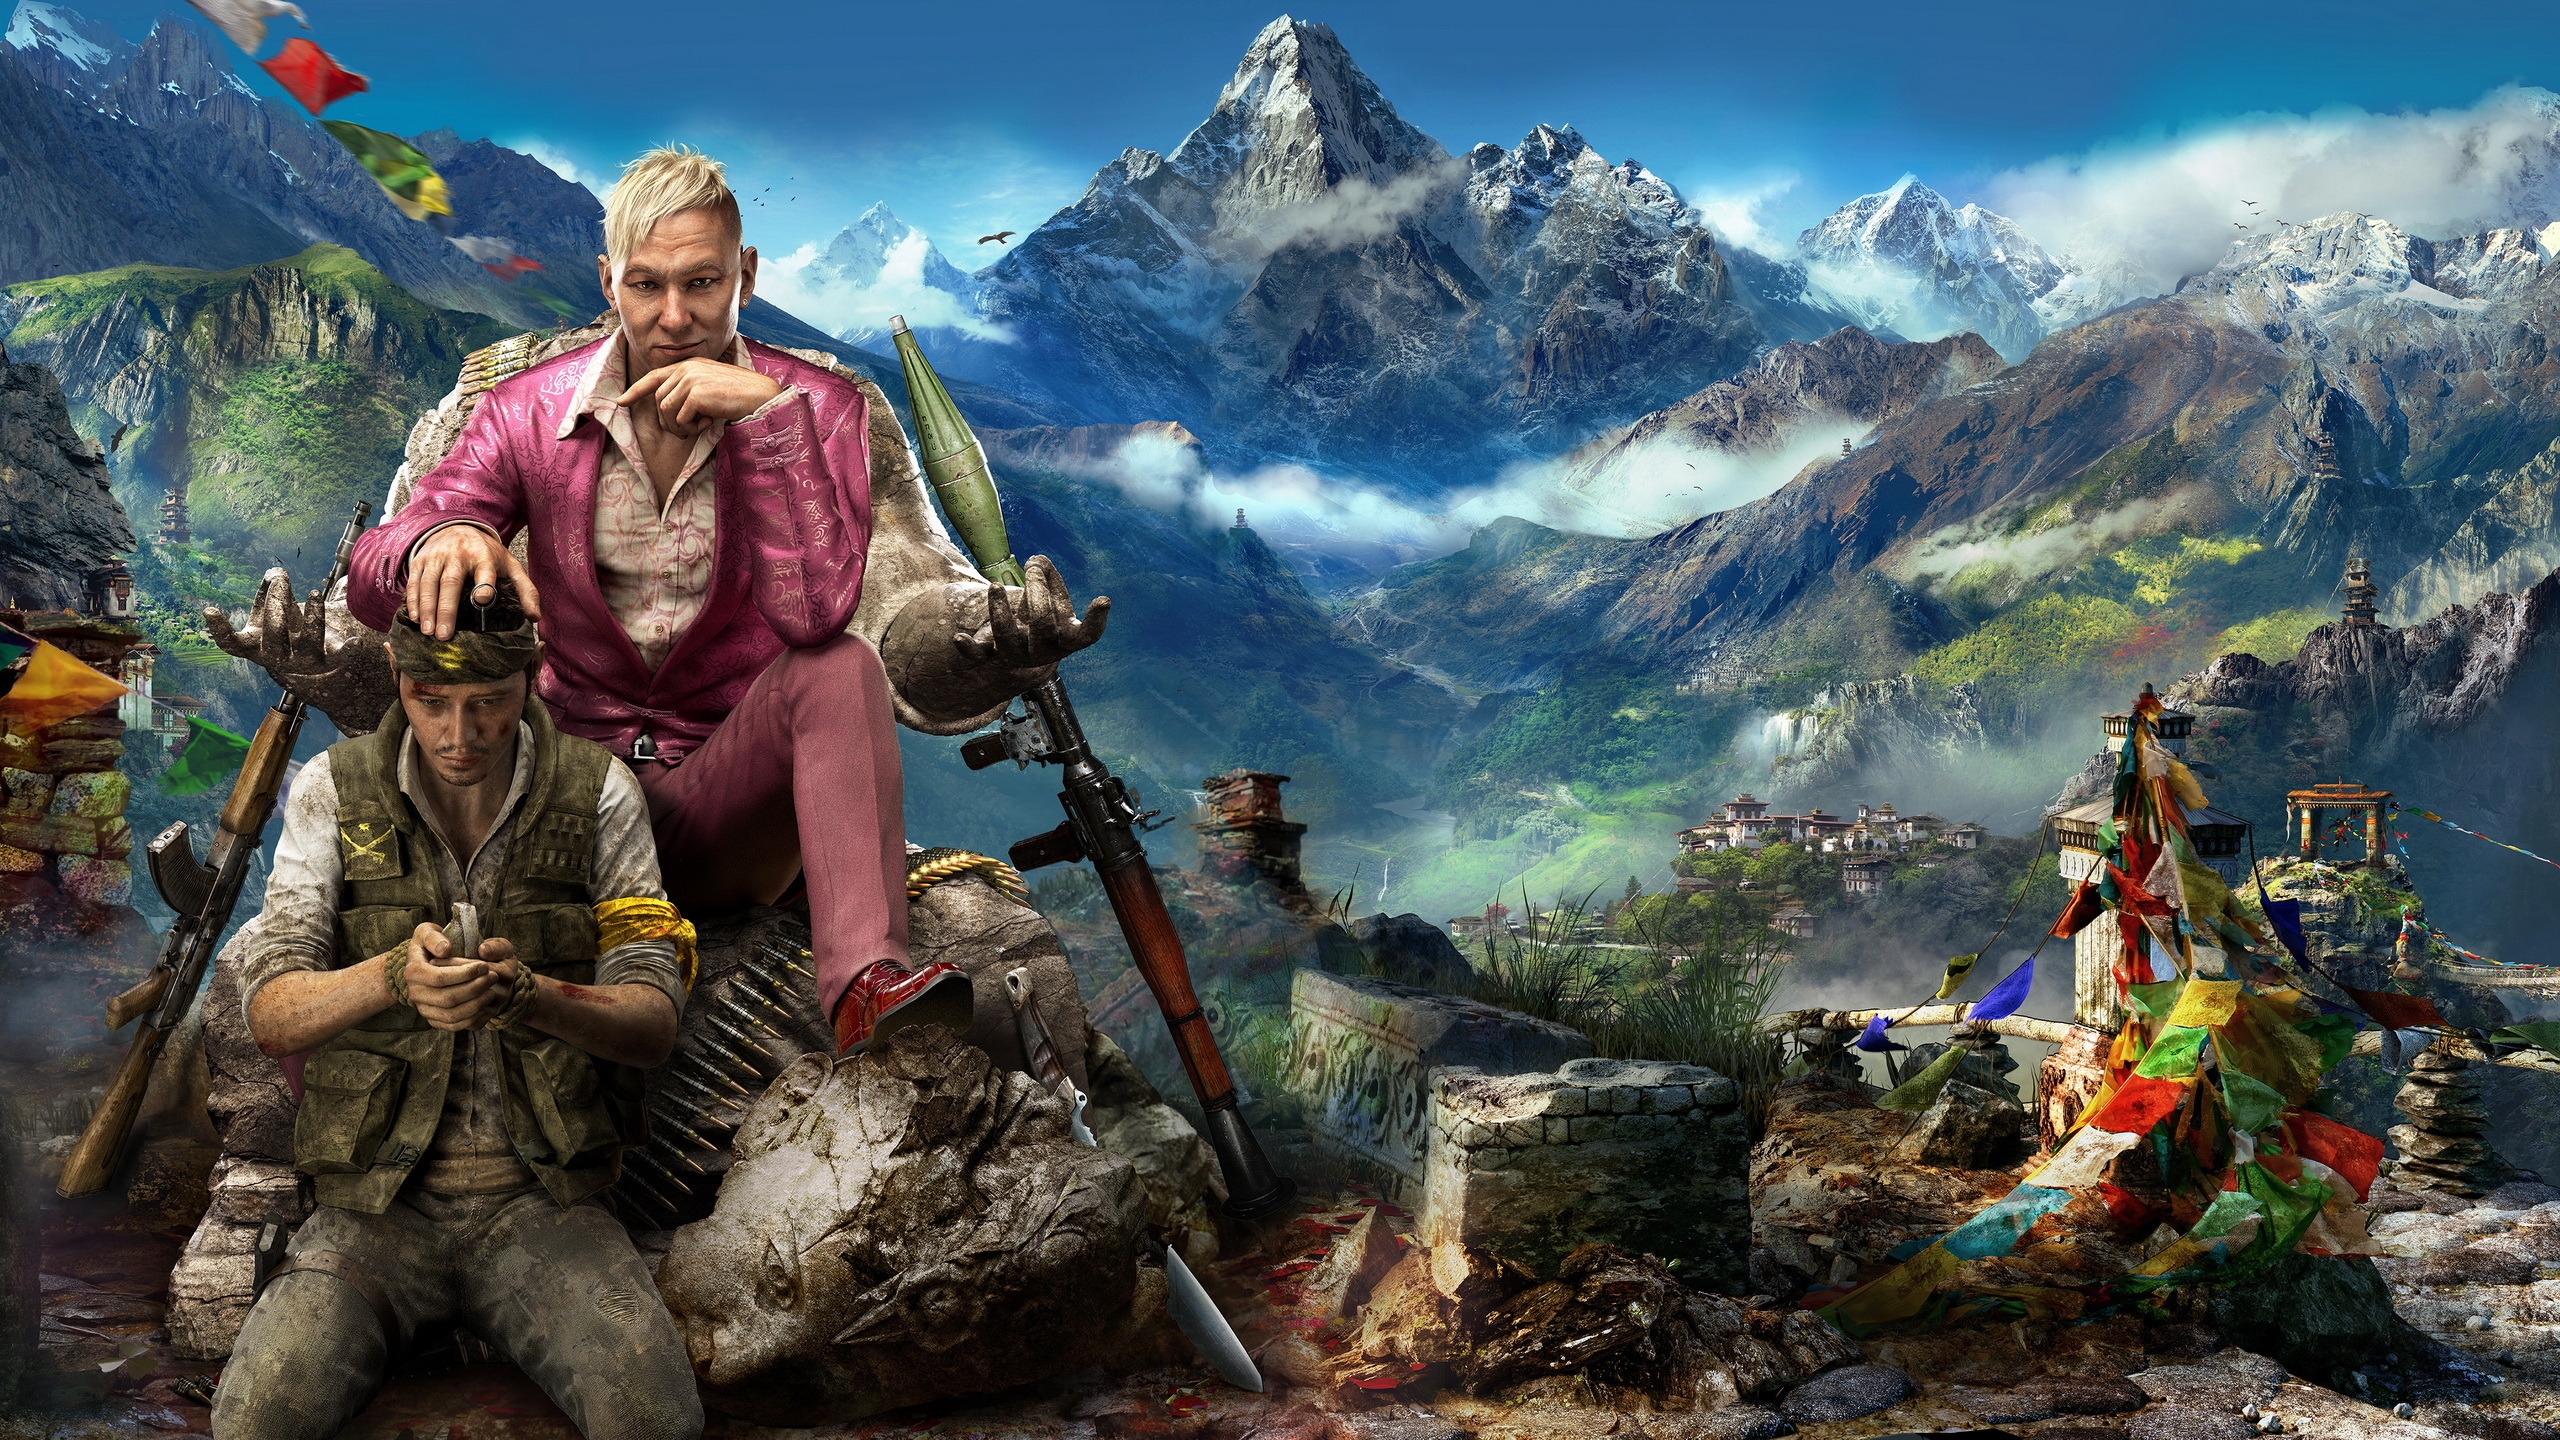 Far Cry 4 Game for 2560x1440 HDTV resolution